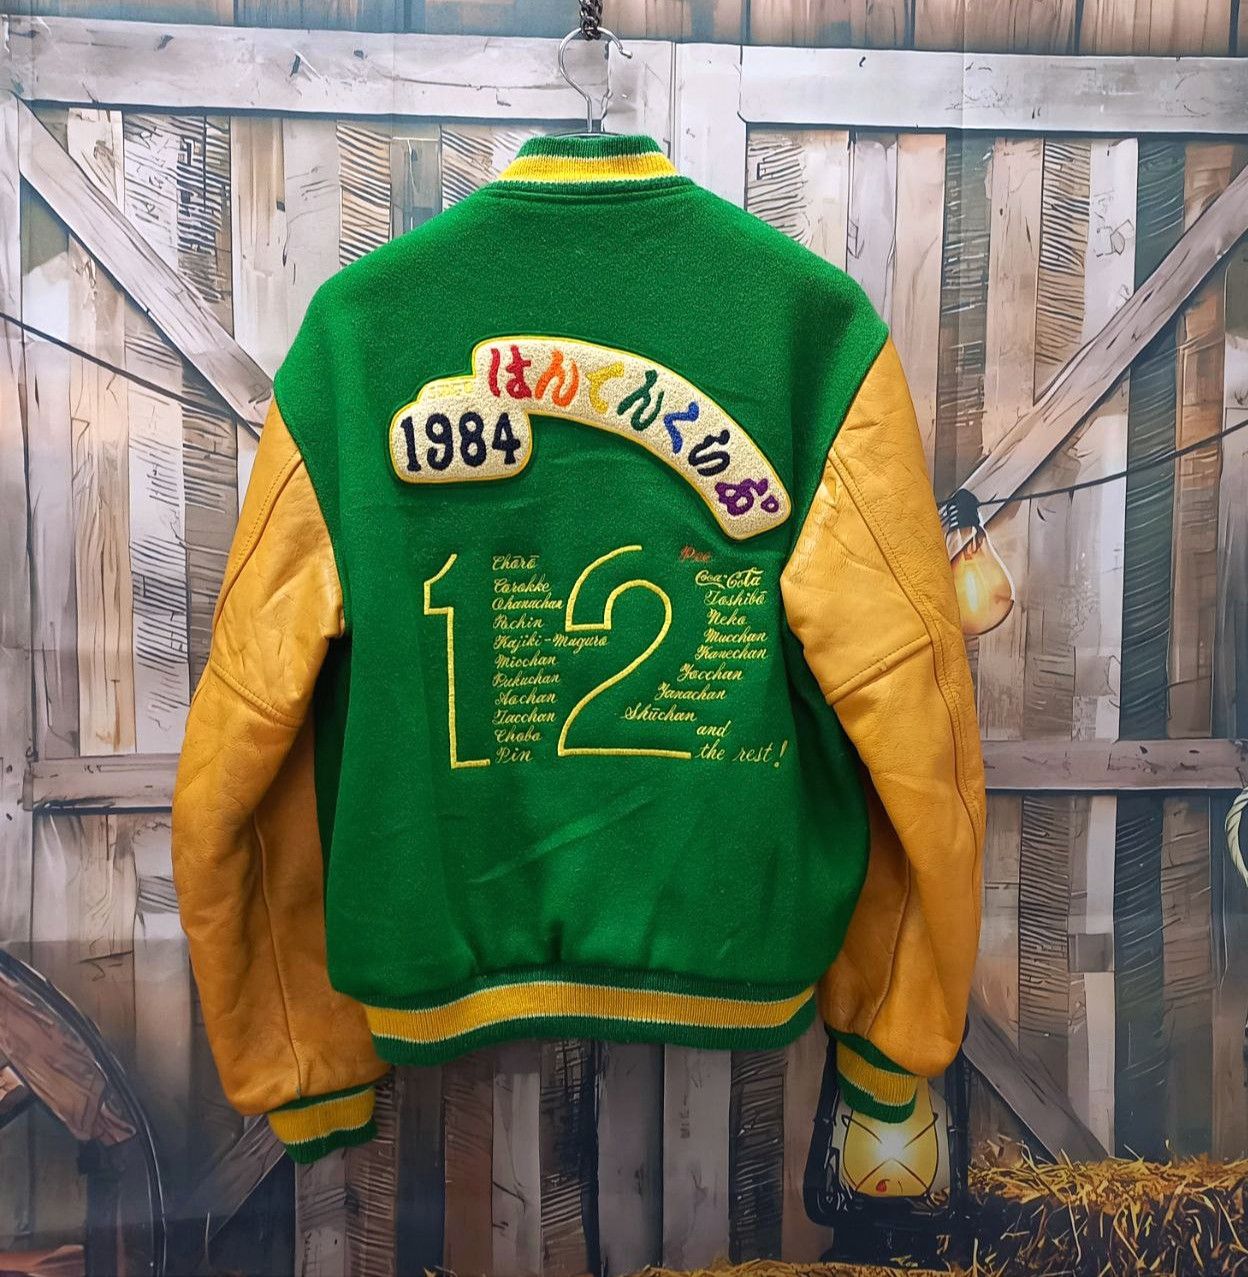 Union Made - HANTEN CLUB 1984 by BUTWIN USA Wool Leather Varsity Jacket - 1